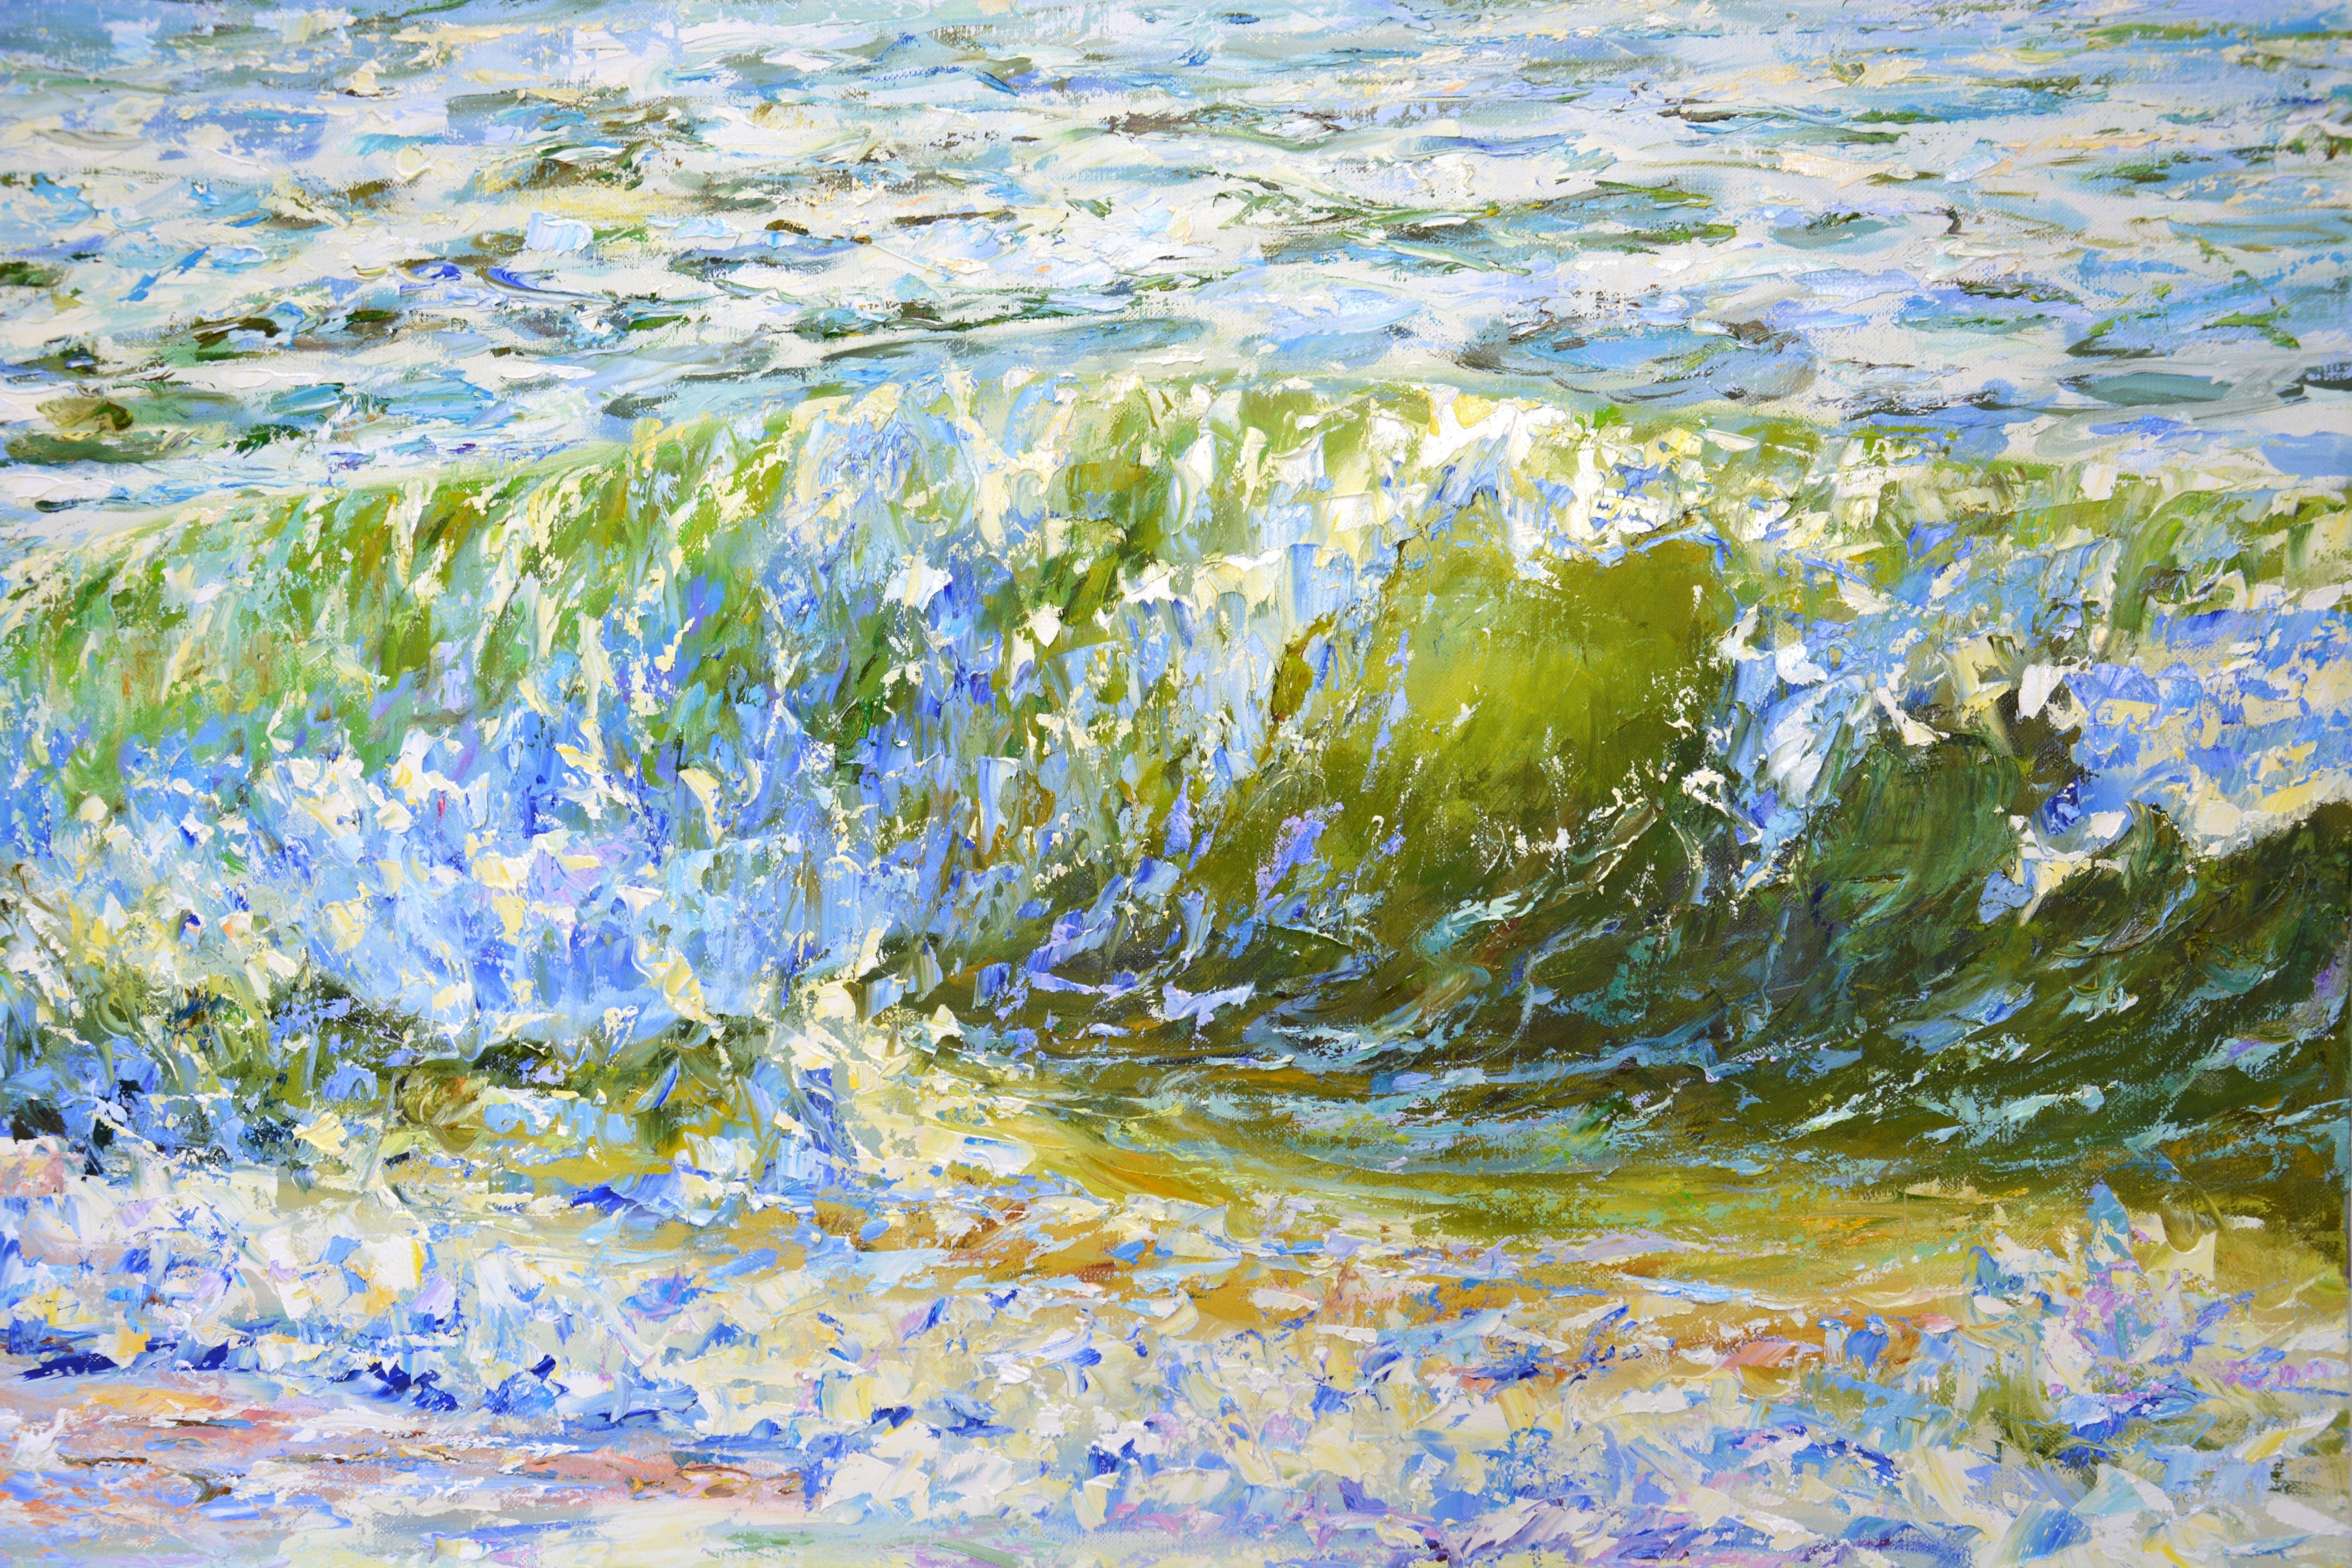 Music of the waves, Painting, Oil on Canvas 3